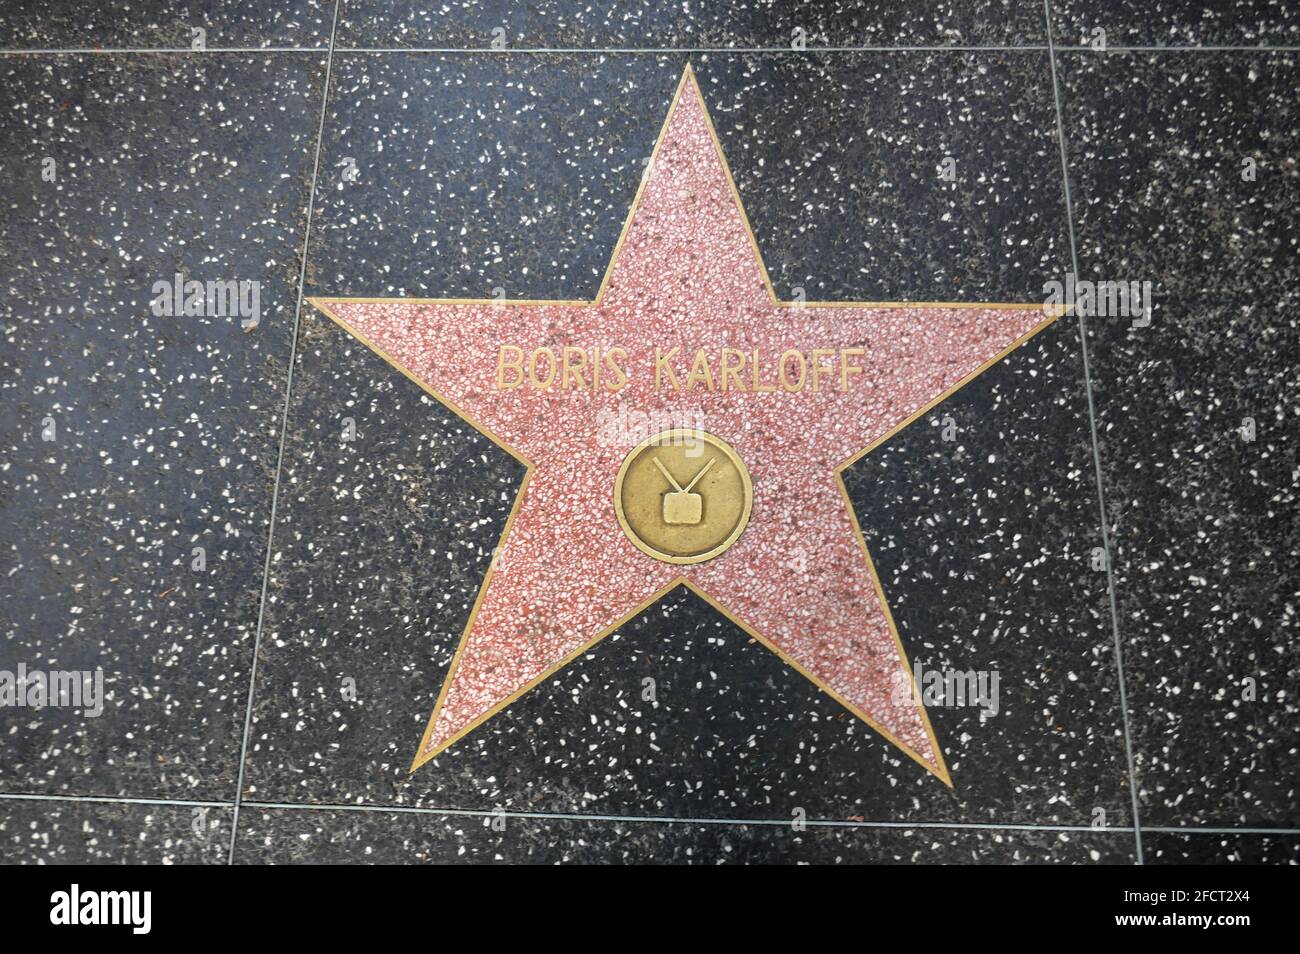 Hollywood, California, USA 17th April 2021 A general view of atmosphere of actor Boris Karloff's Star on the Hollywood Walk of Fame on April 17, 2021 in Hollywood, California, USA. Photo by Barry King/Alamy Stock Photo Stock Photo